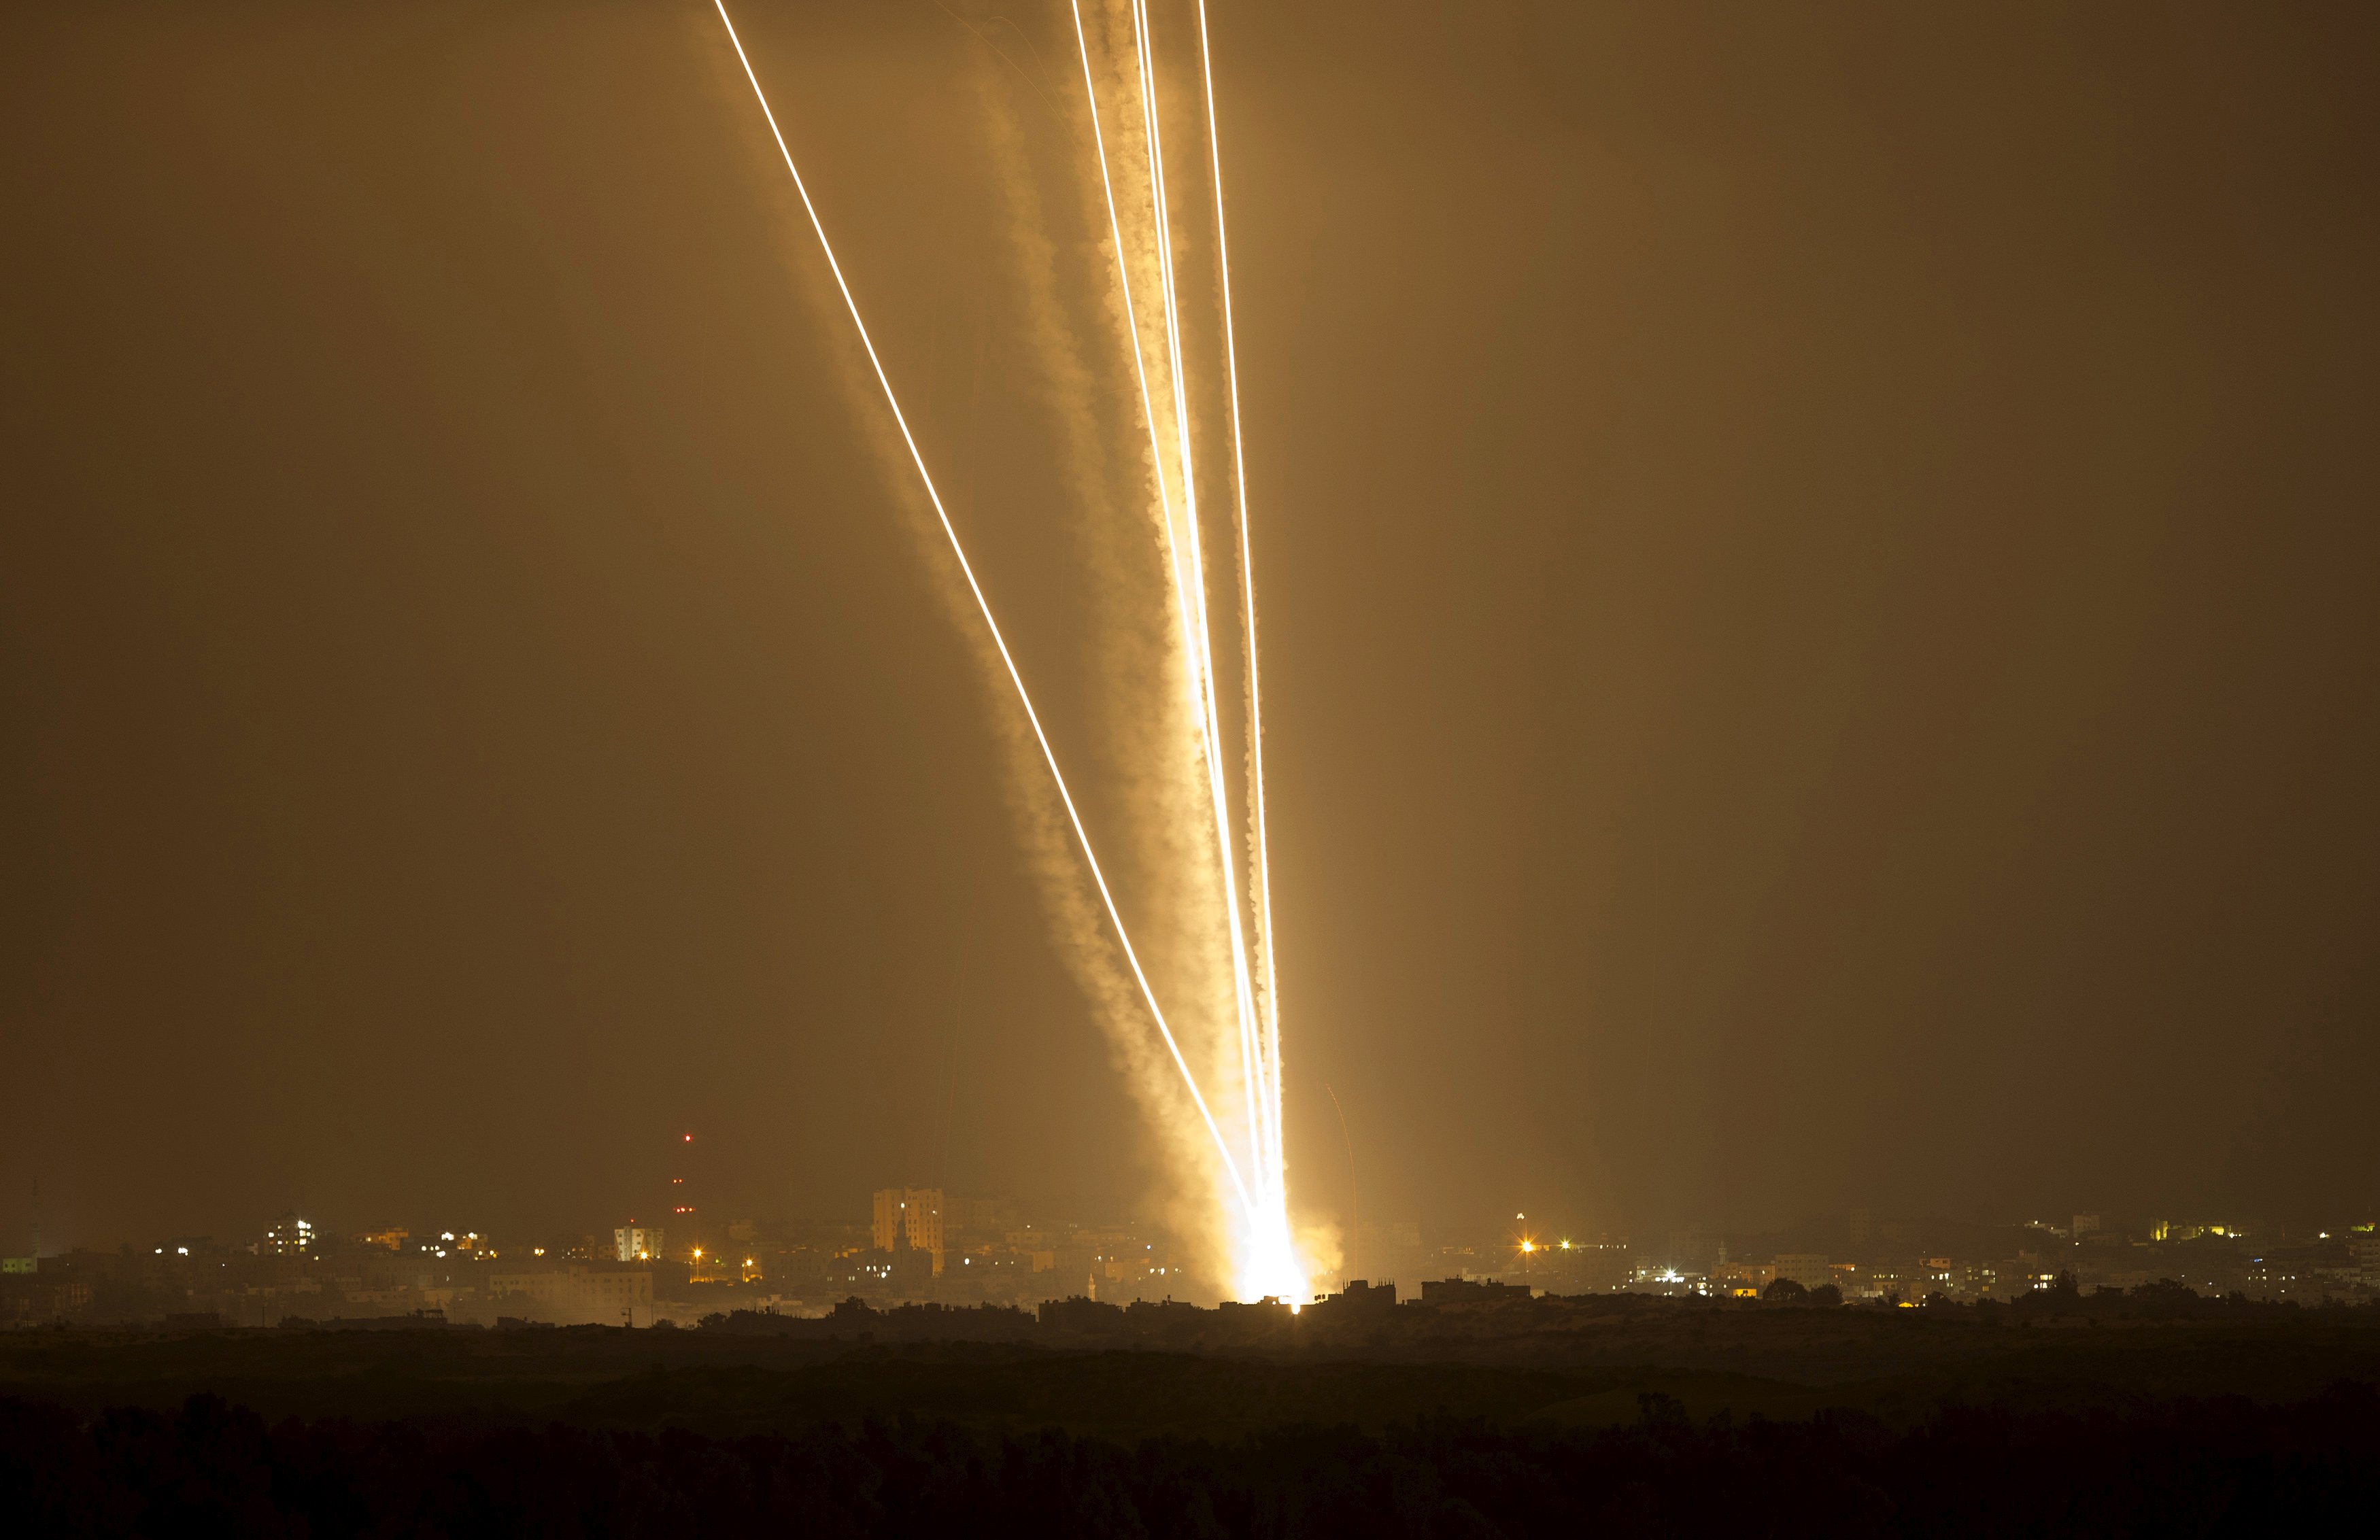 Light streaks and smoke trails are seen as rockets are launched from Gaza towards Israel in this July 23, 2014 file photo. Israel disputed on June 22, 2015 the findings of a U.N. report that it may have committed war crimes in the 2014 Gaza conflict, saying its forces acted 